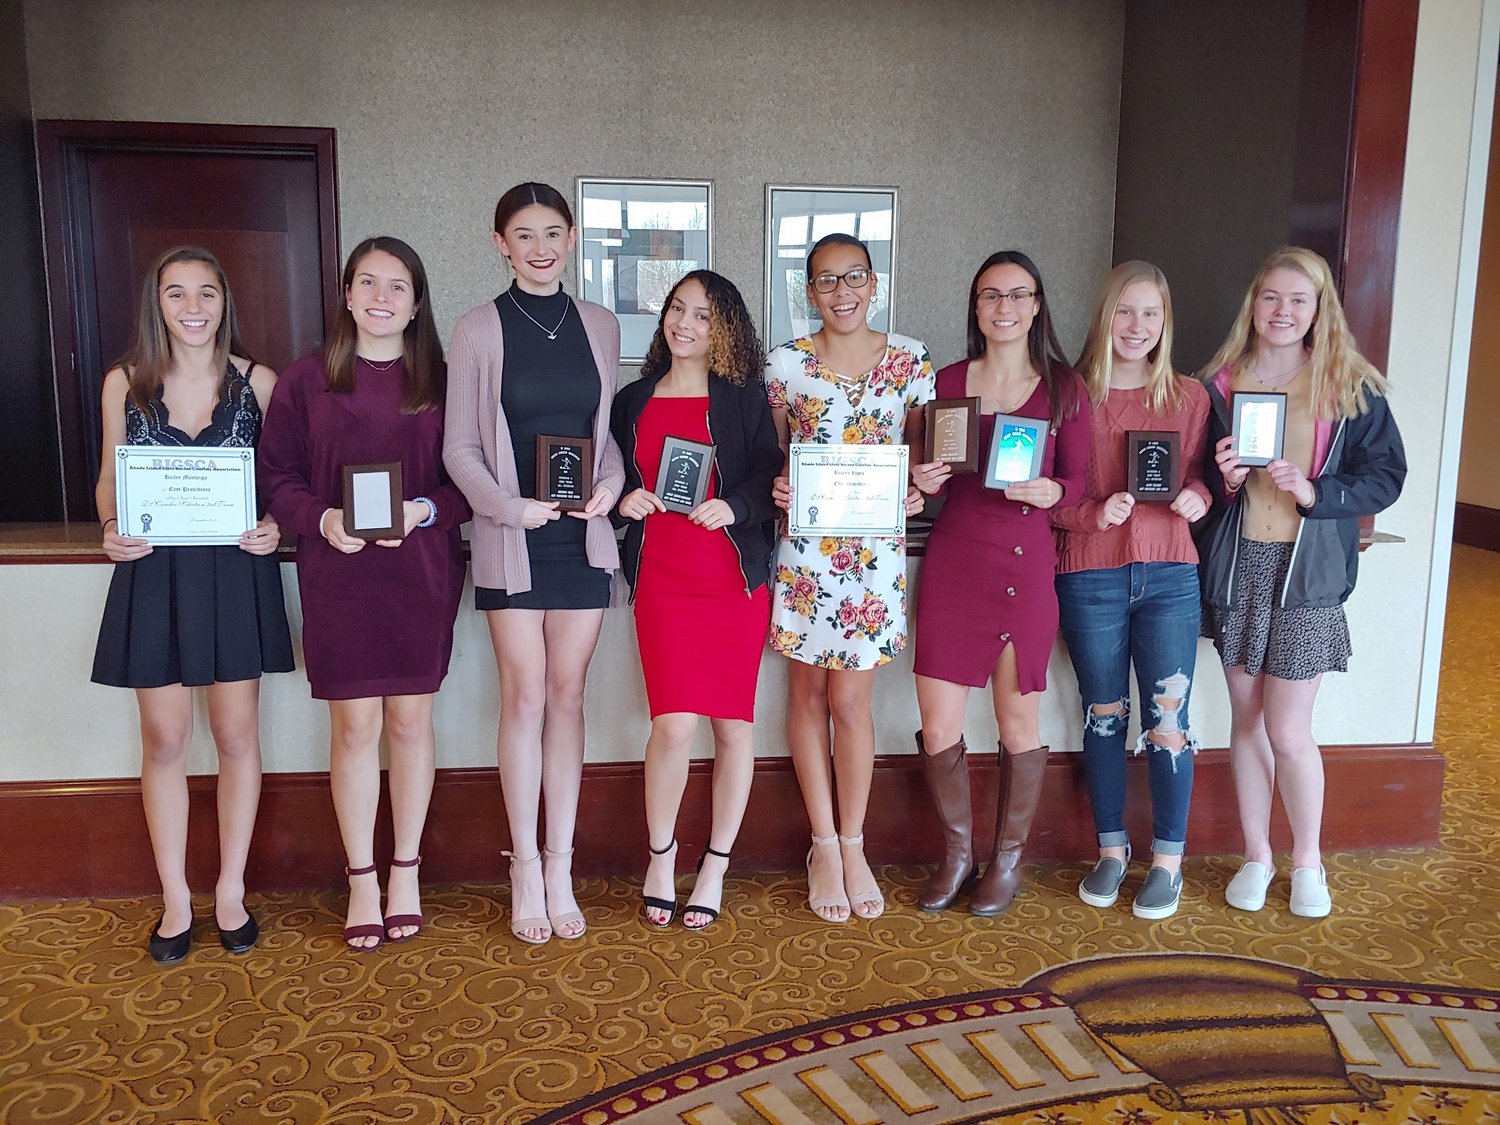 Members of the EPHS girls' soccer team recently received their awards for their performances during the 2019 fall season.